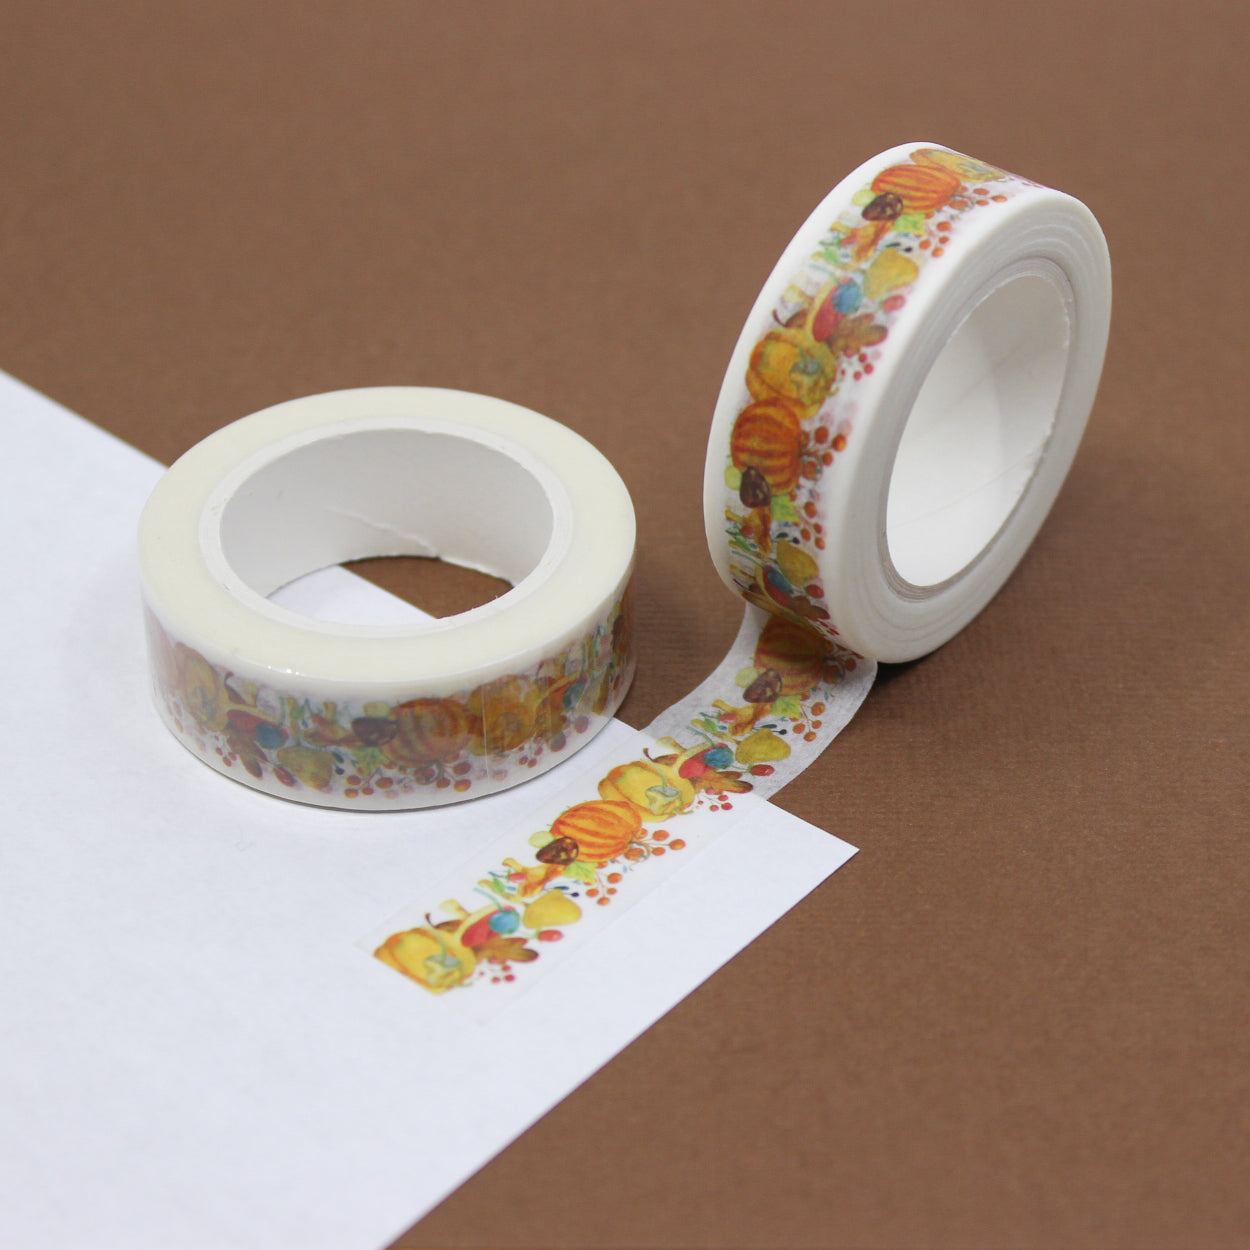 Celebrate the charm of autumn with our pumpkin patch washi tape, featuring adorable pumpkin illustrations in a whimsical patch-like arrangement, perfect for adding a touch of fall to your crafts. This tape is sold at BBB Supplies Craft Shop.